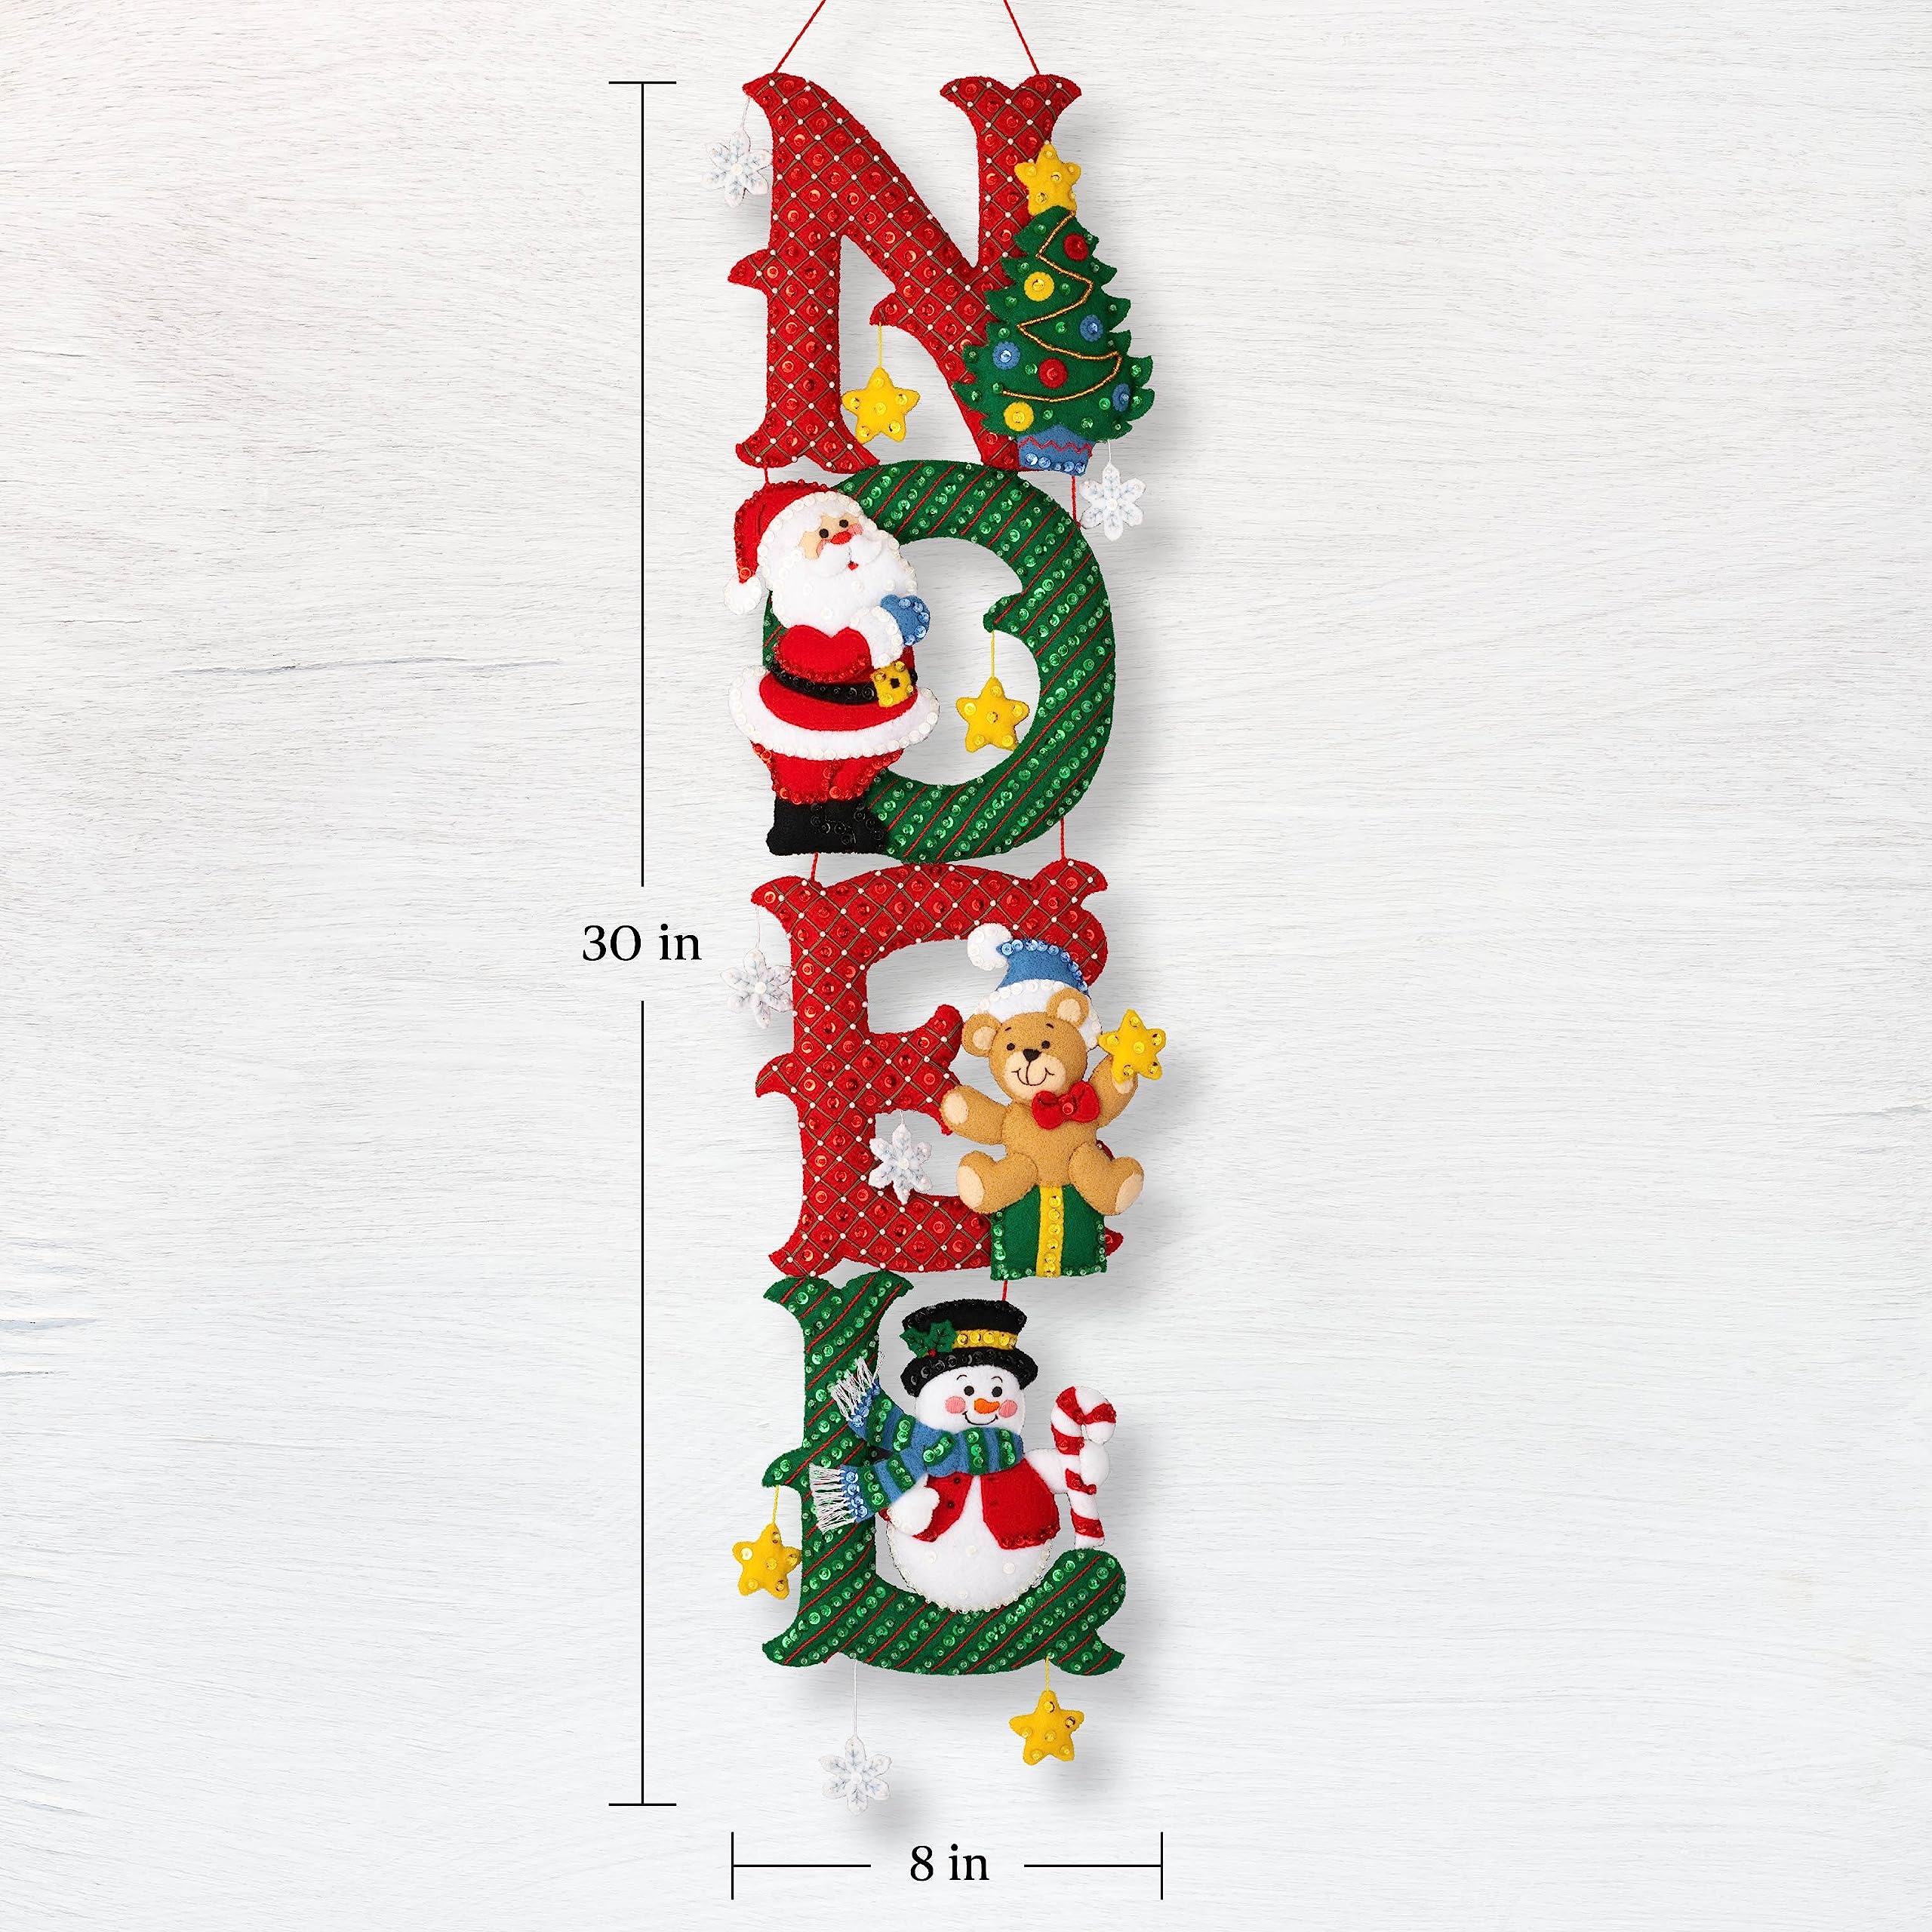 Bucilla Felt Applique Wall Hanging Kit, Noel, Perfect for Holiday DIY Arts and Crafts, 89655E